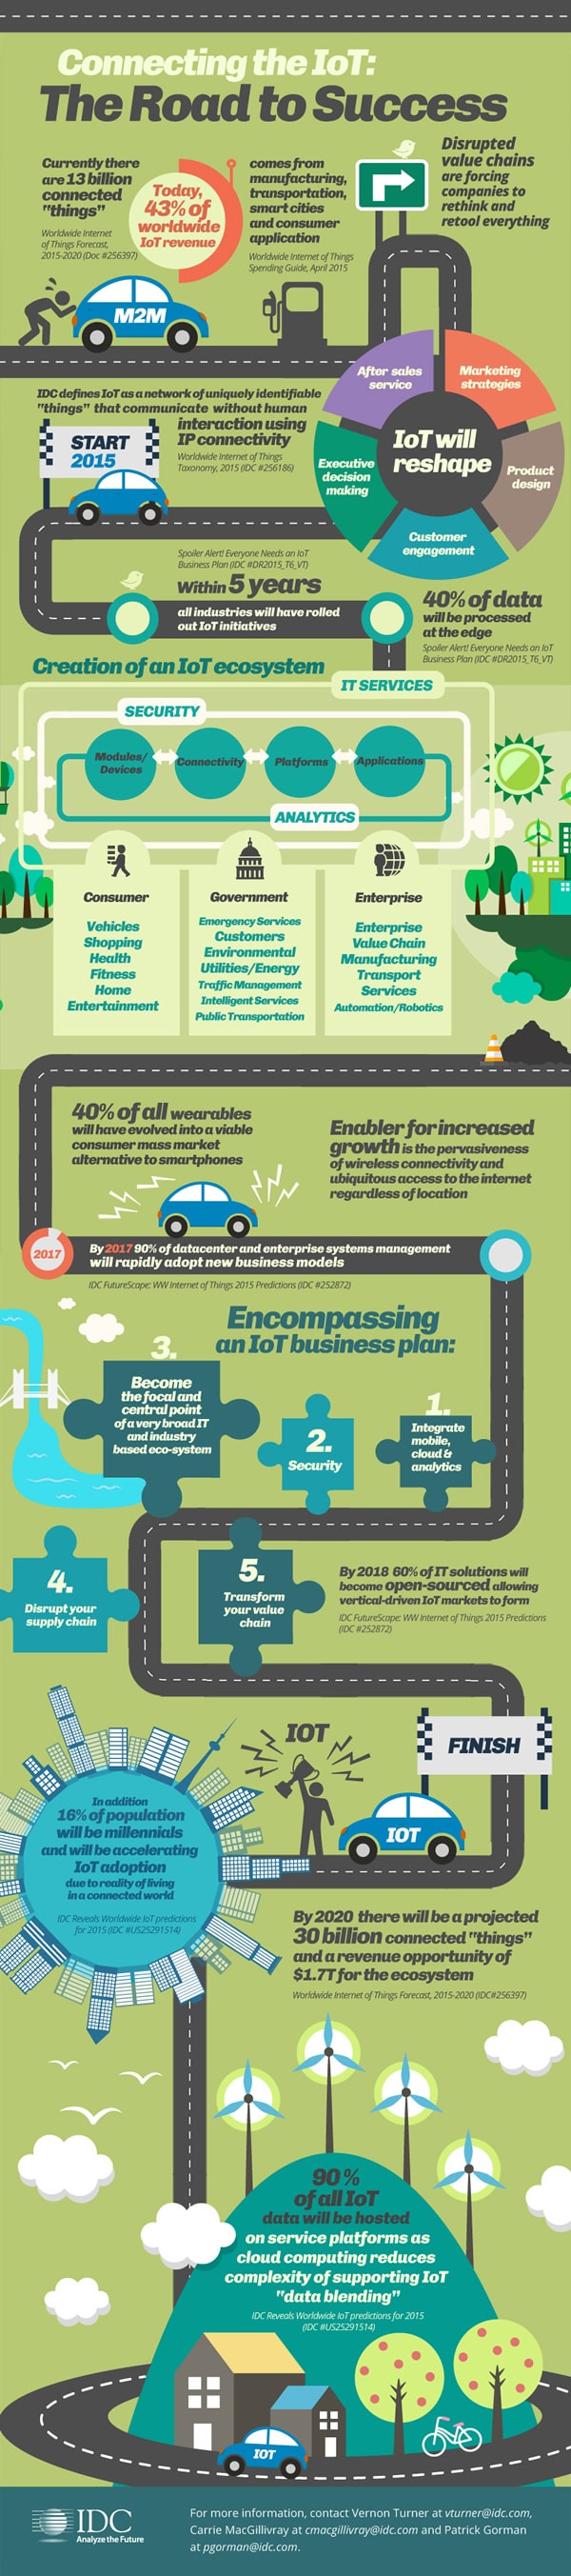 IoT predictions by IDC - security as an intrinsic part of an IoT business plan: via IDC infographics